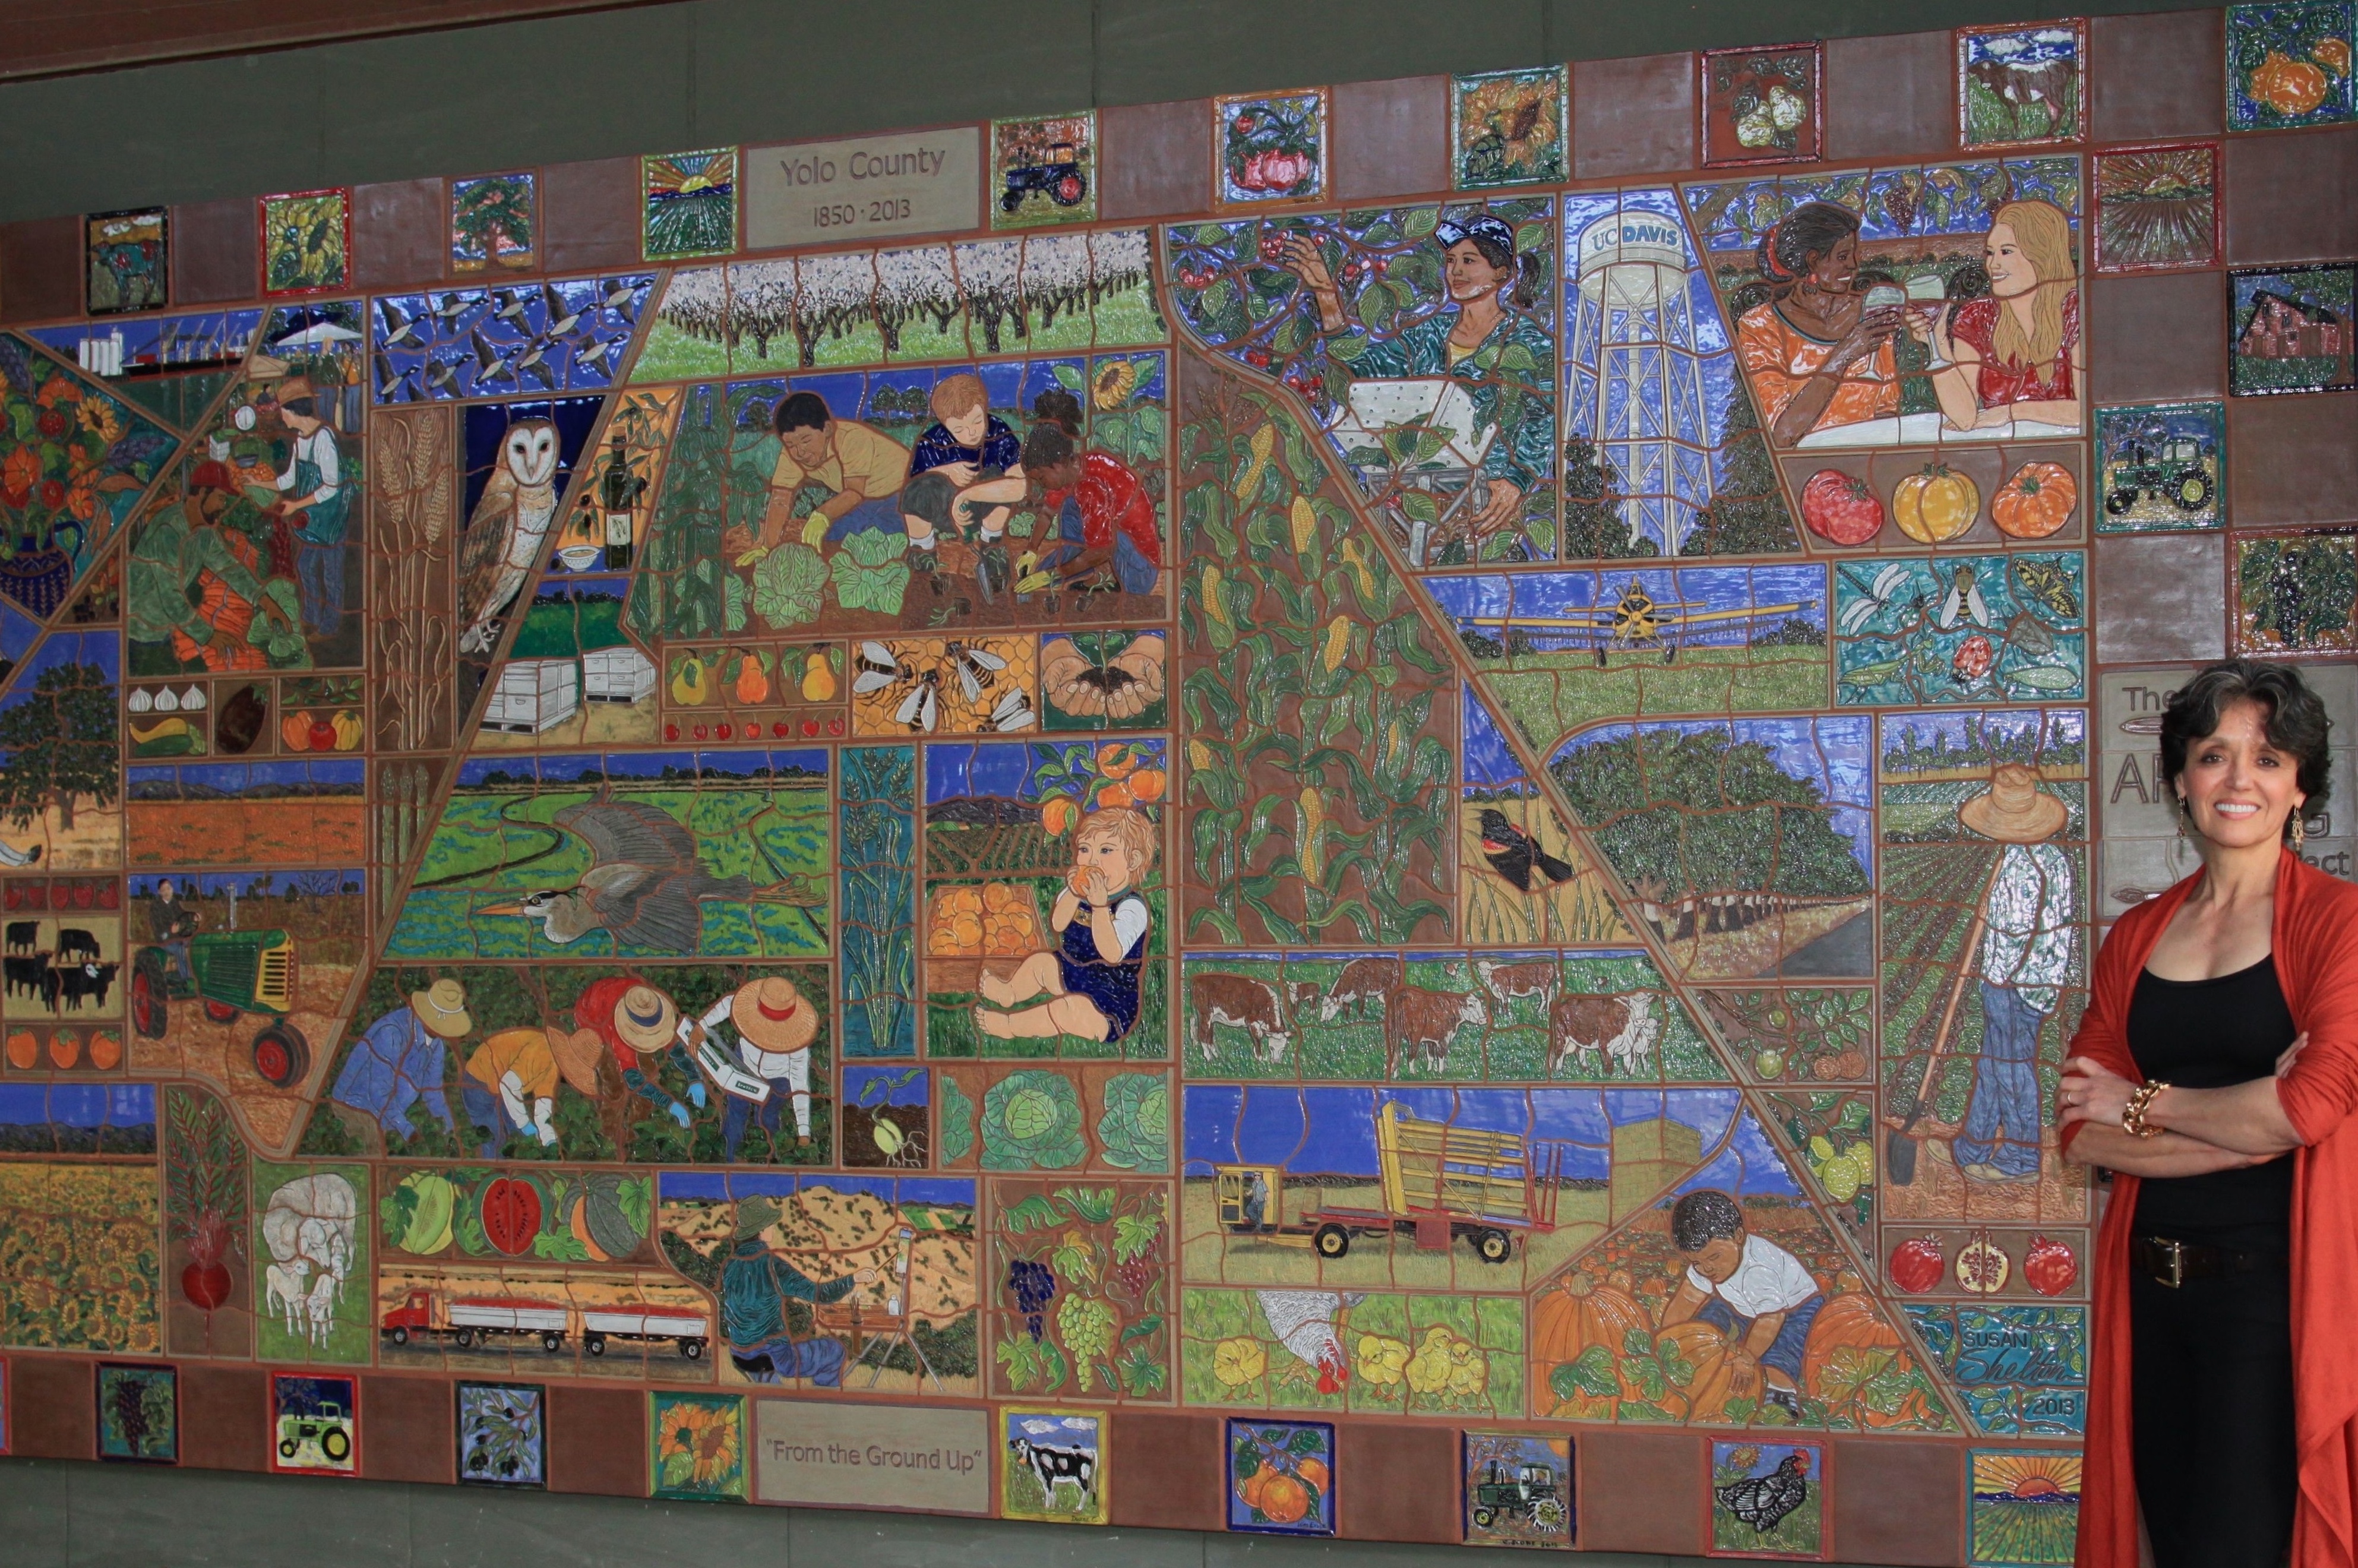 Colorful Ceramic Mural Featuring People Crops and Life in an Agricultural County